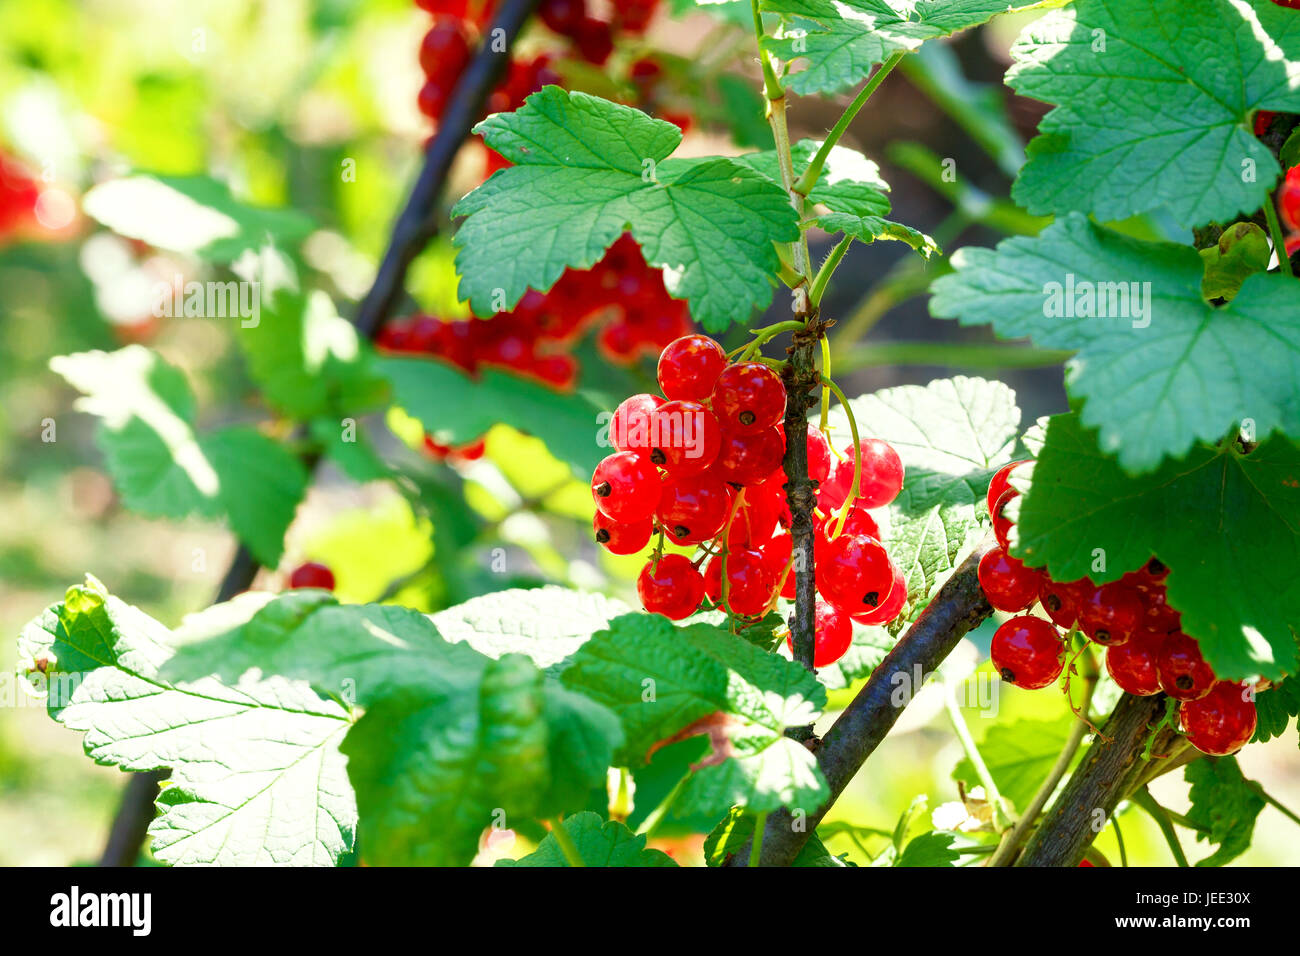 Fruits of red currants on the bushes in the garden. Stock Photo